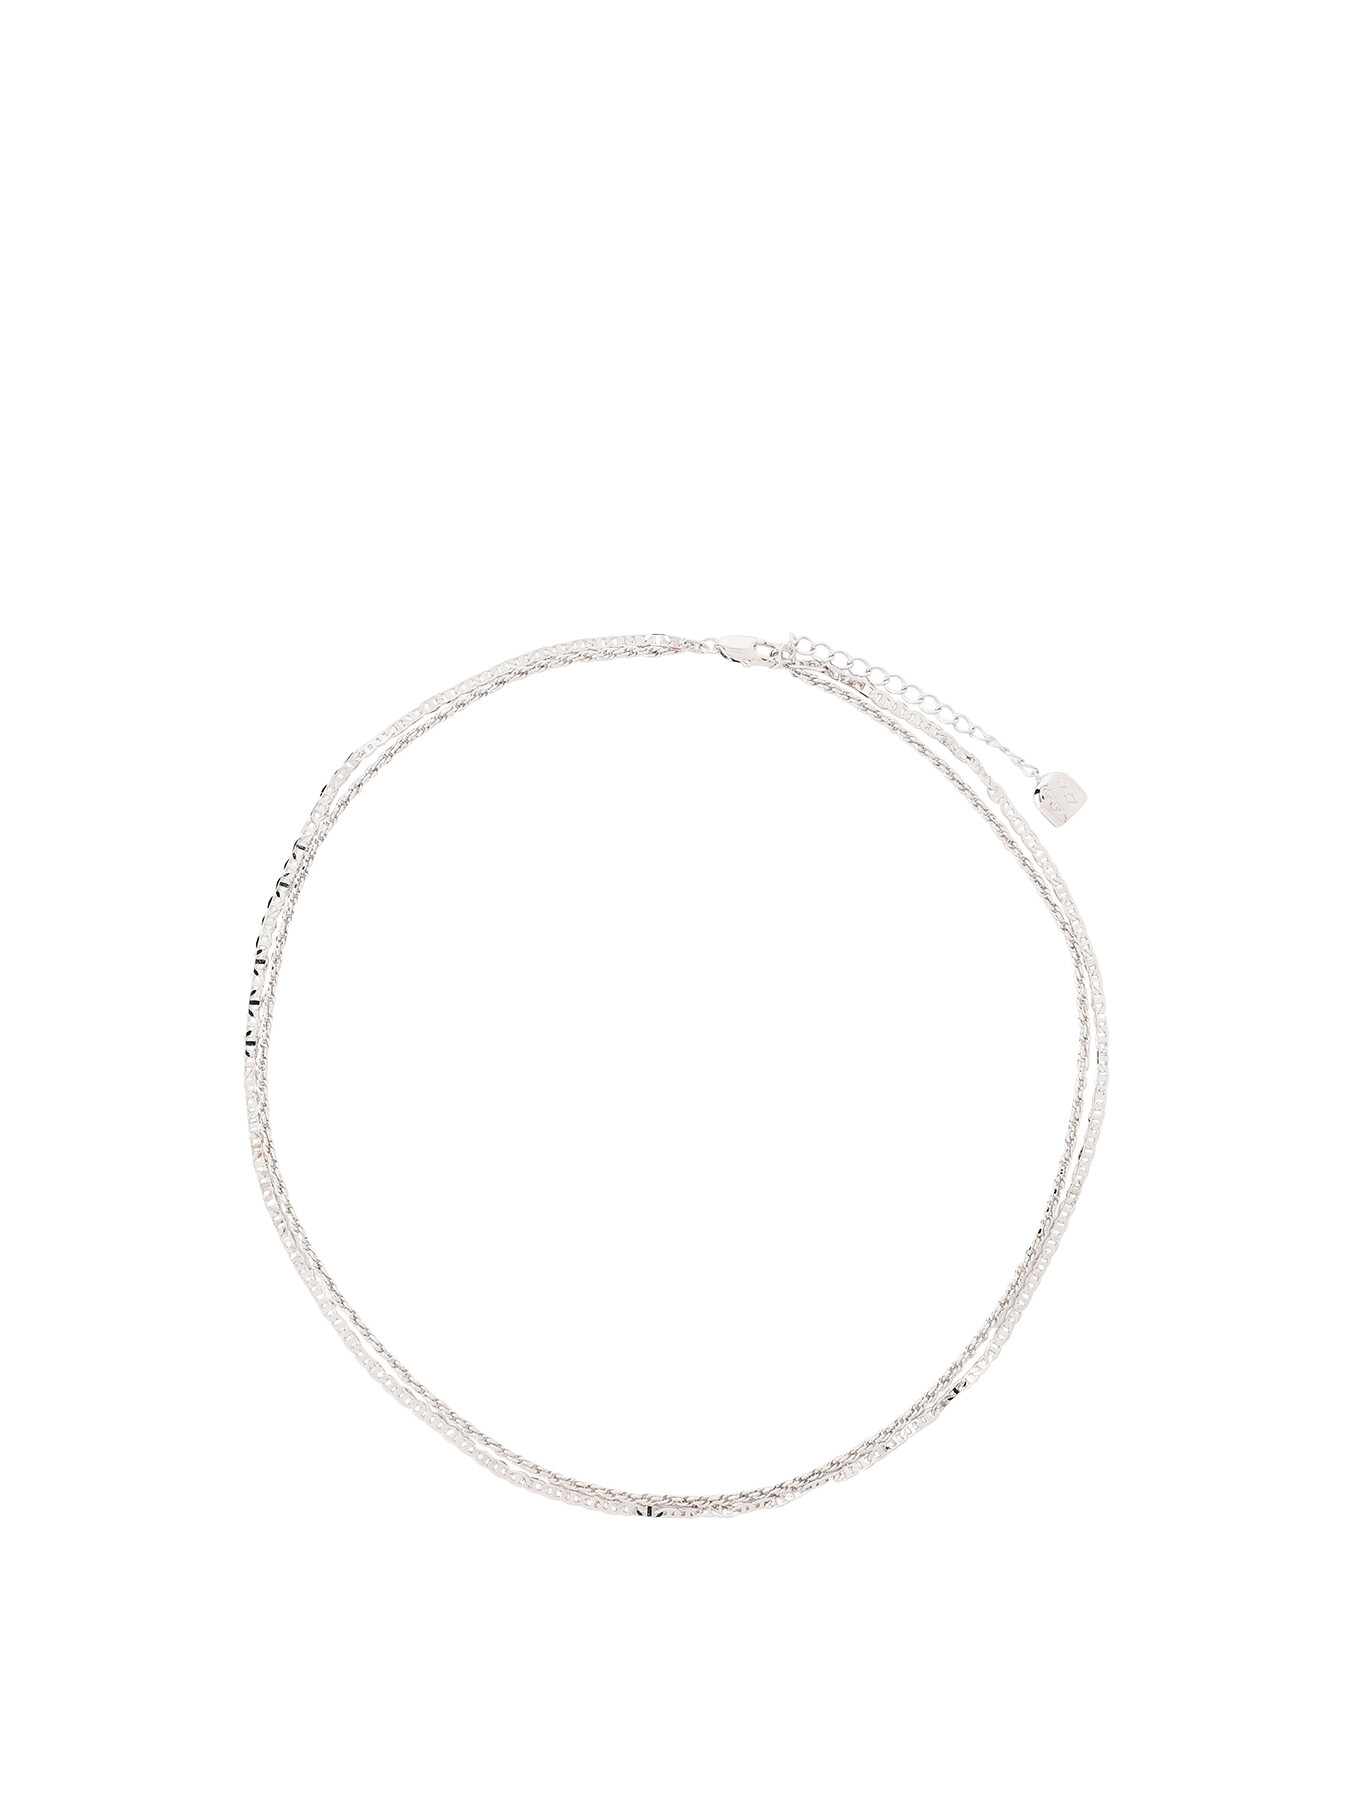 Astrid & Miyu Duo Chain Necklace Silver